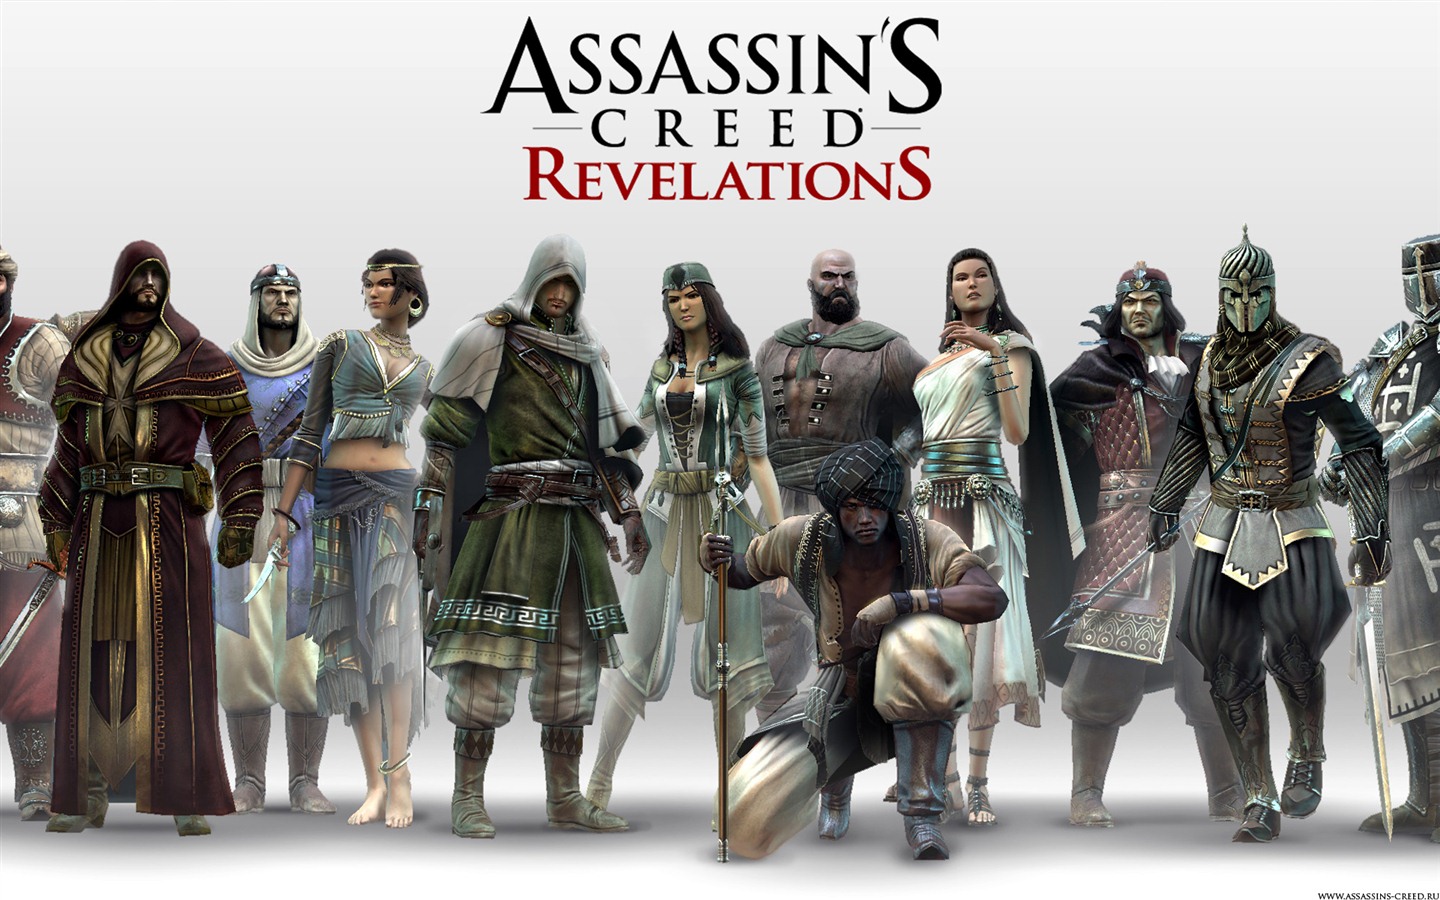 Assassin's Creed: Revelations HD wallpapers #27 - 1440x900